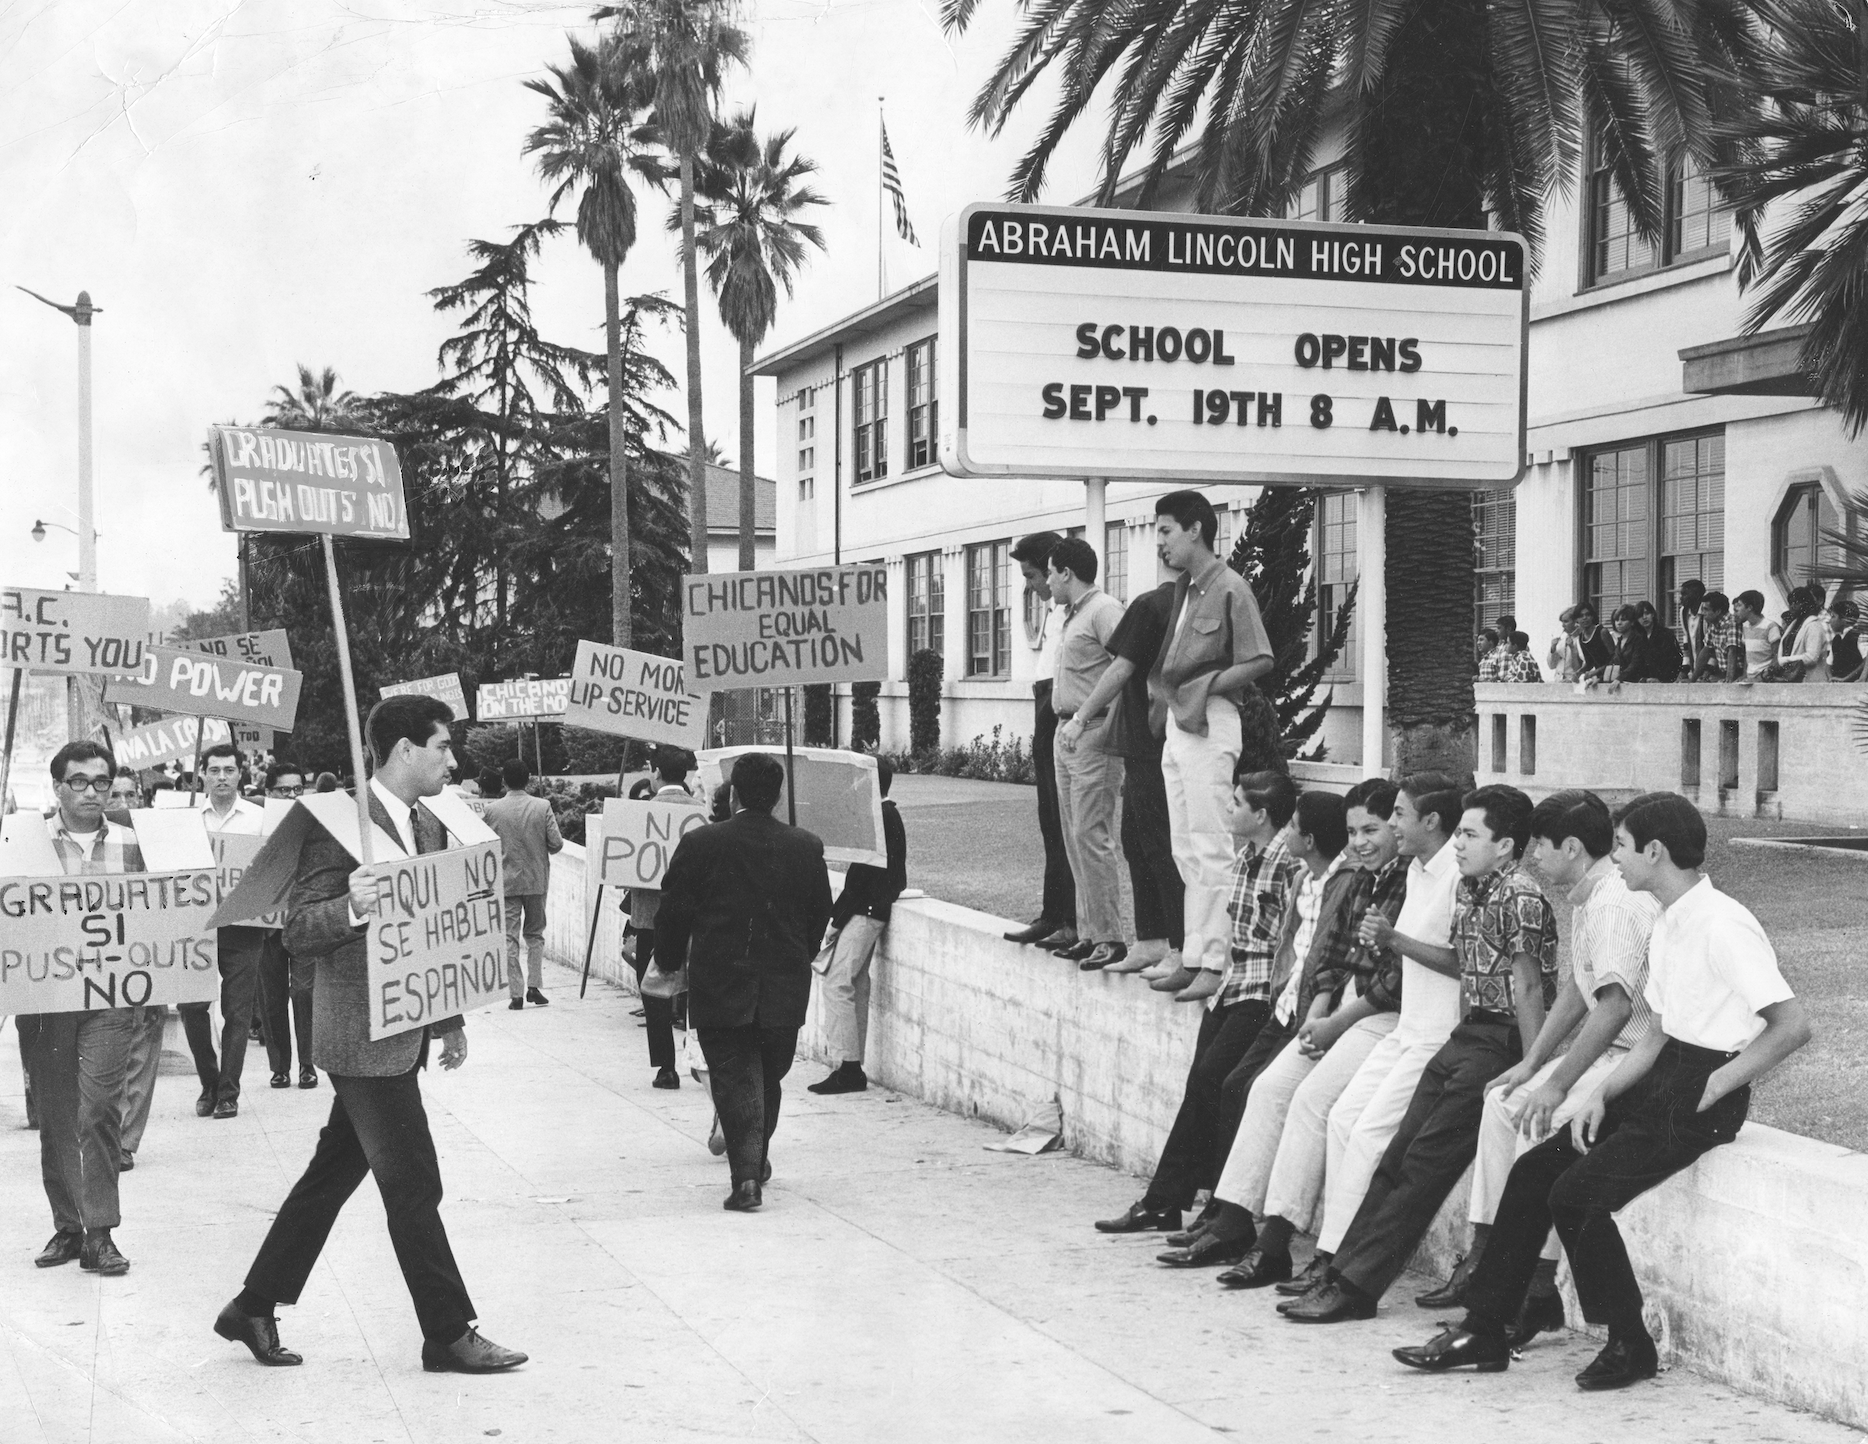 March Into History: Just 5 in 1970, CSUDH Growth Shaped by Historic Event